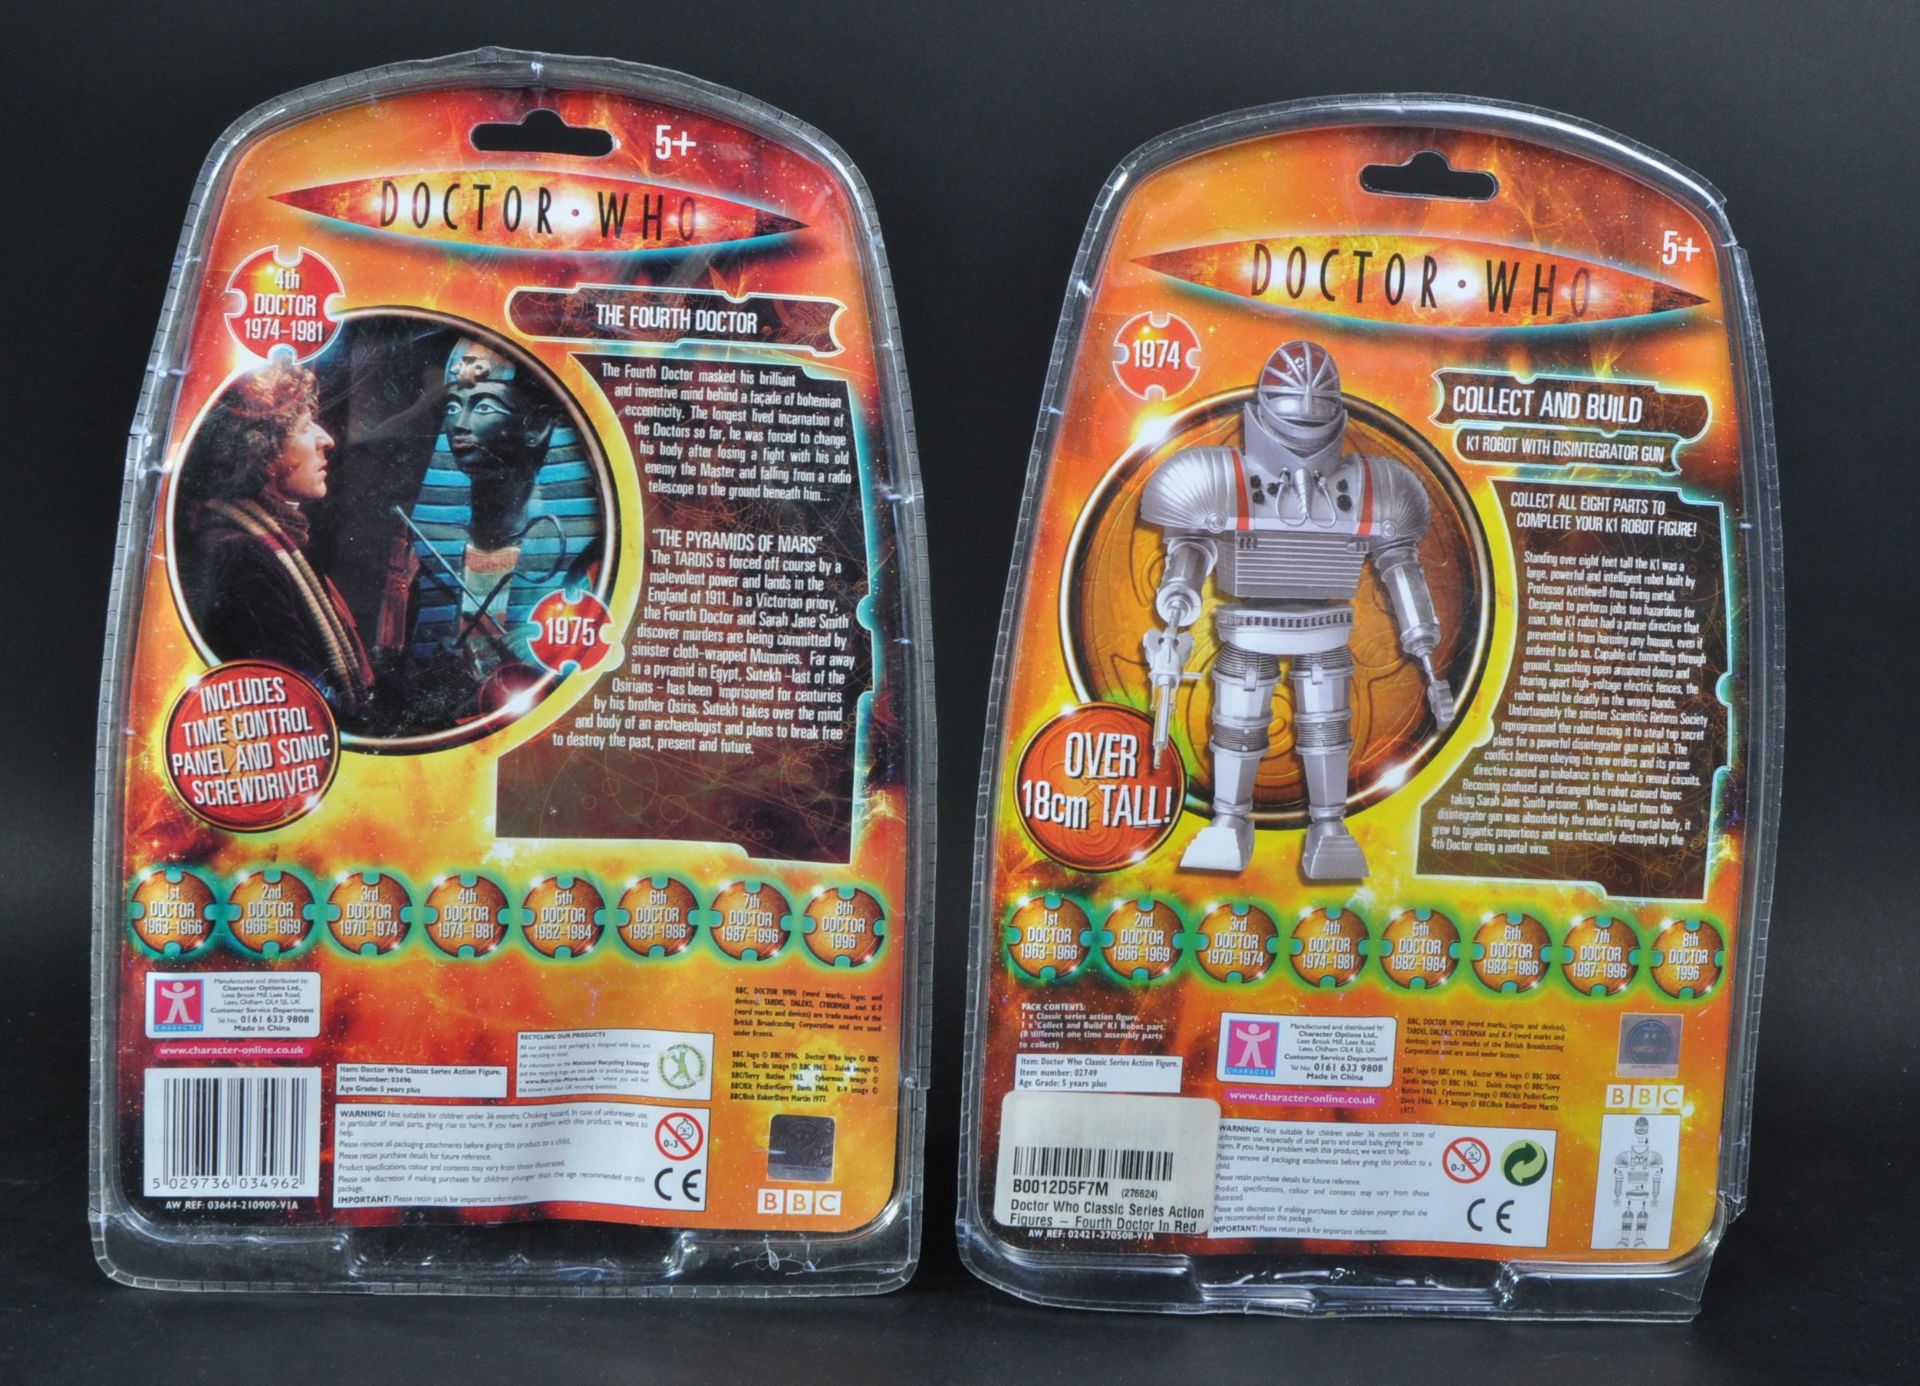 DOCTOR WHO - CHARACTER OPTIONS - FOURTH DOCTOR ACTION FIGURES - Image 5 of 5